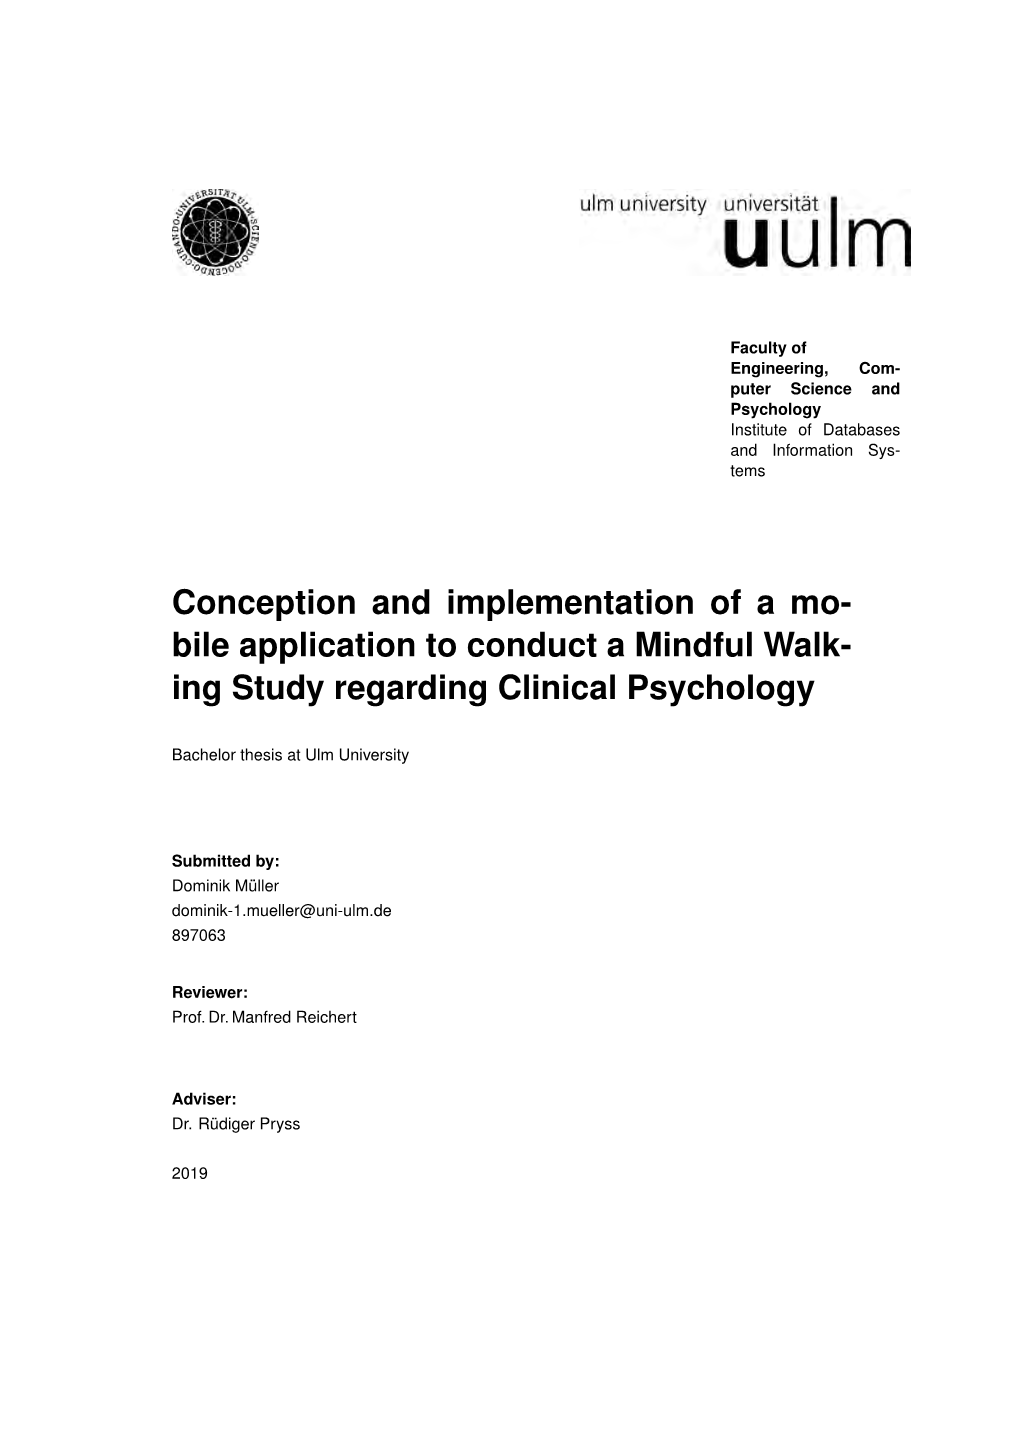 Bile Application to Conduct a Mindful Walk- Ing Study Regarding Clinical Psychology